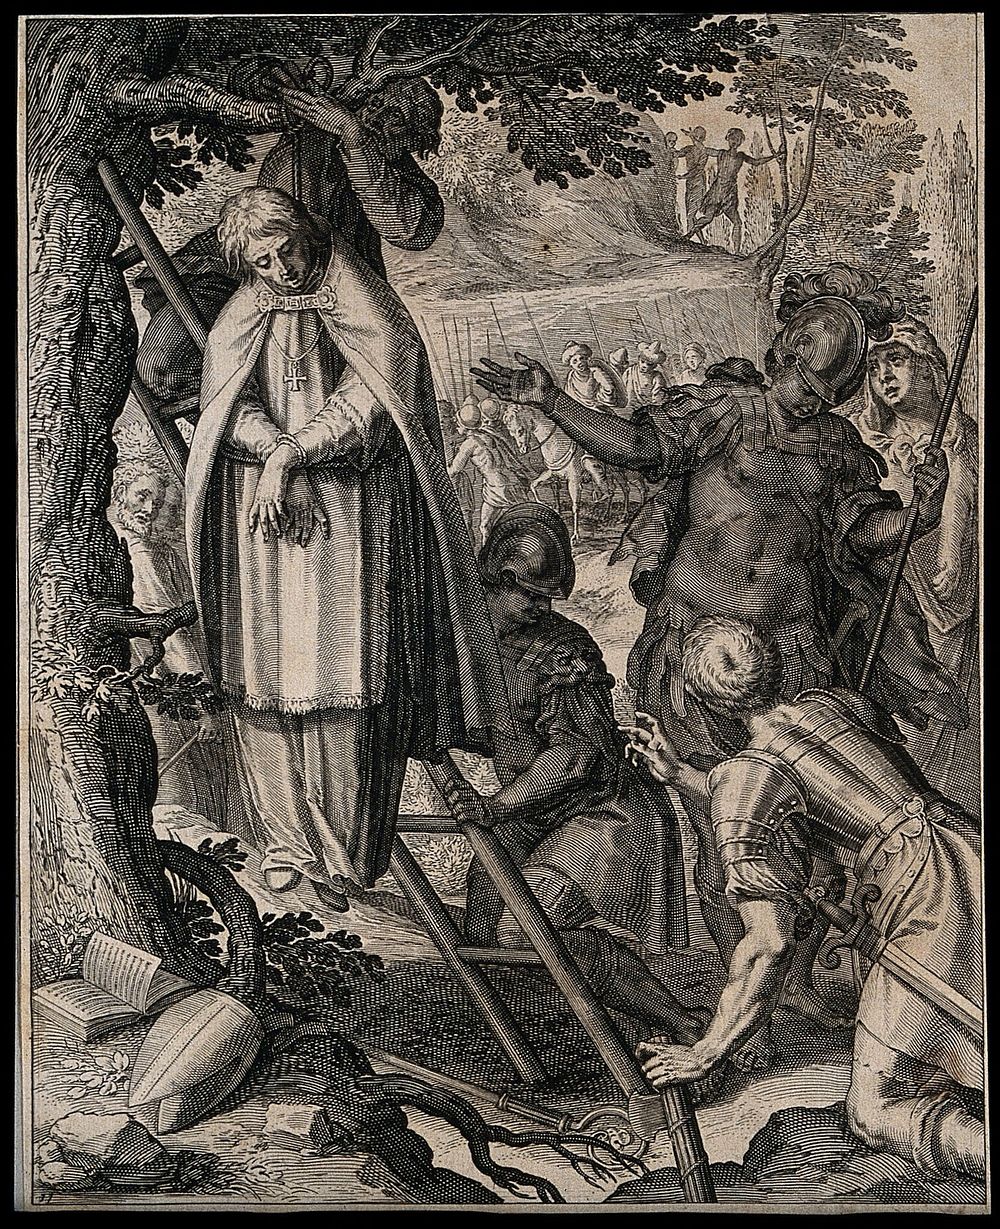 The hanging of Saint Maximus of Salzburg; Roman soldiers and other figures in the foreground, an army in the background.…